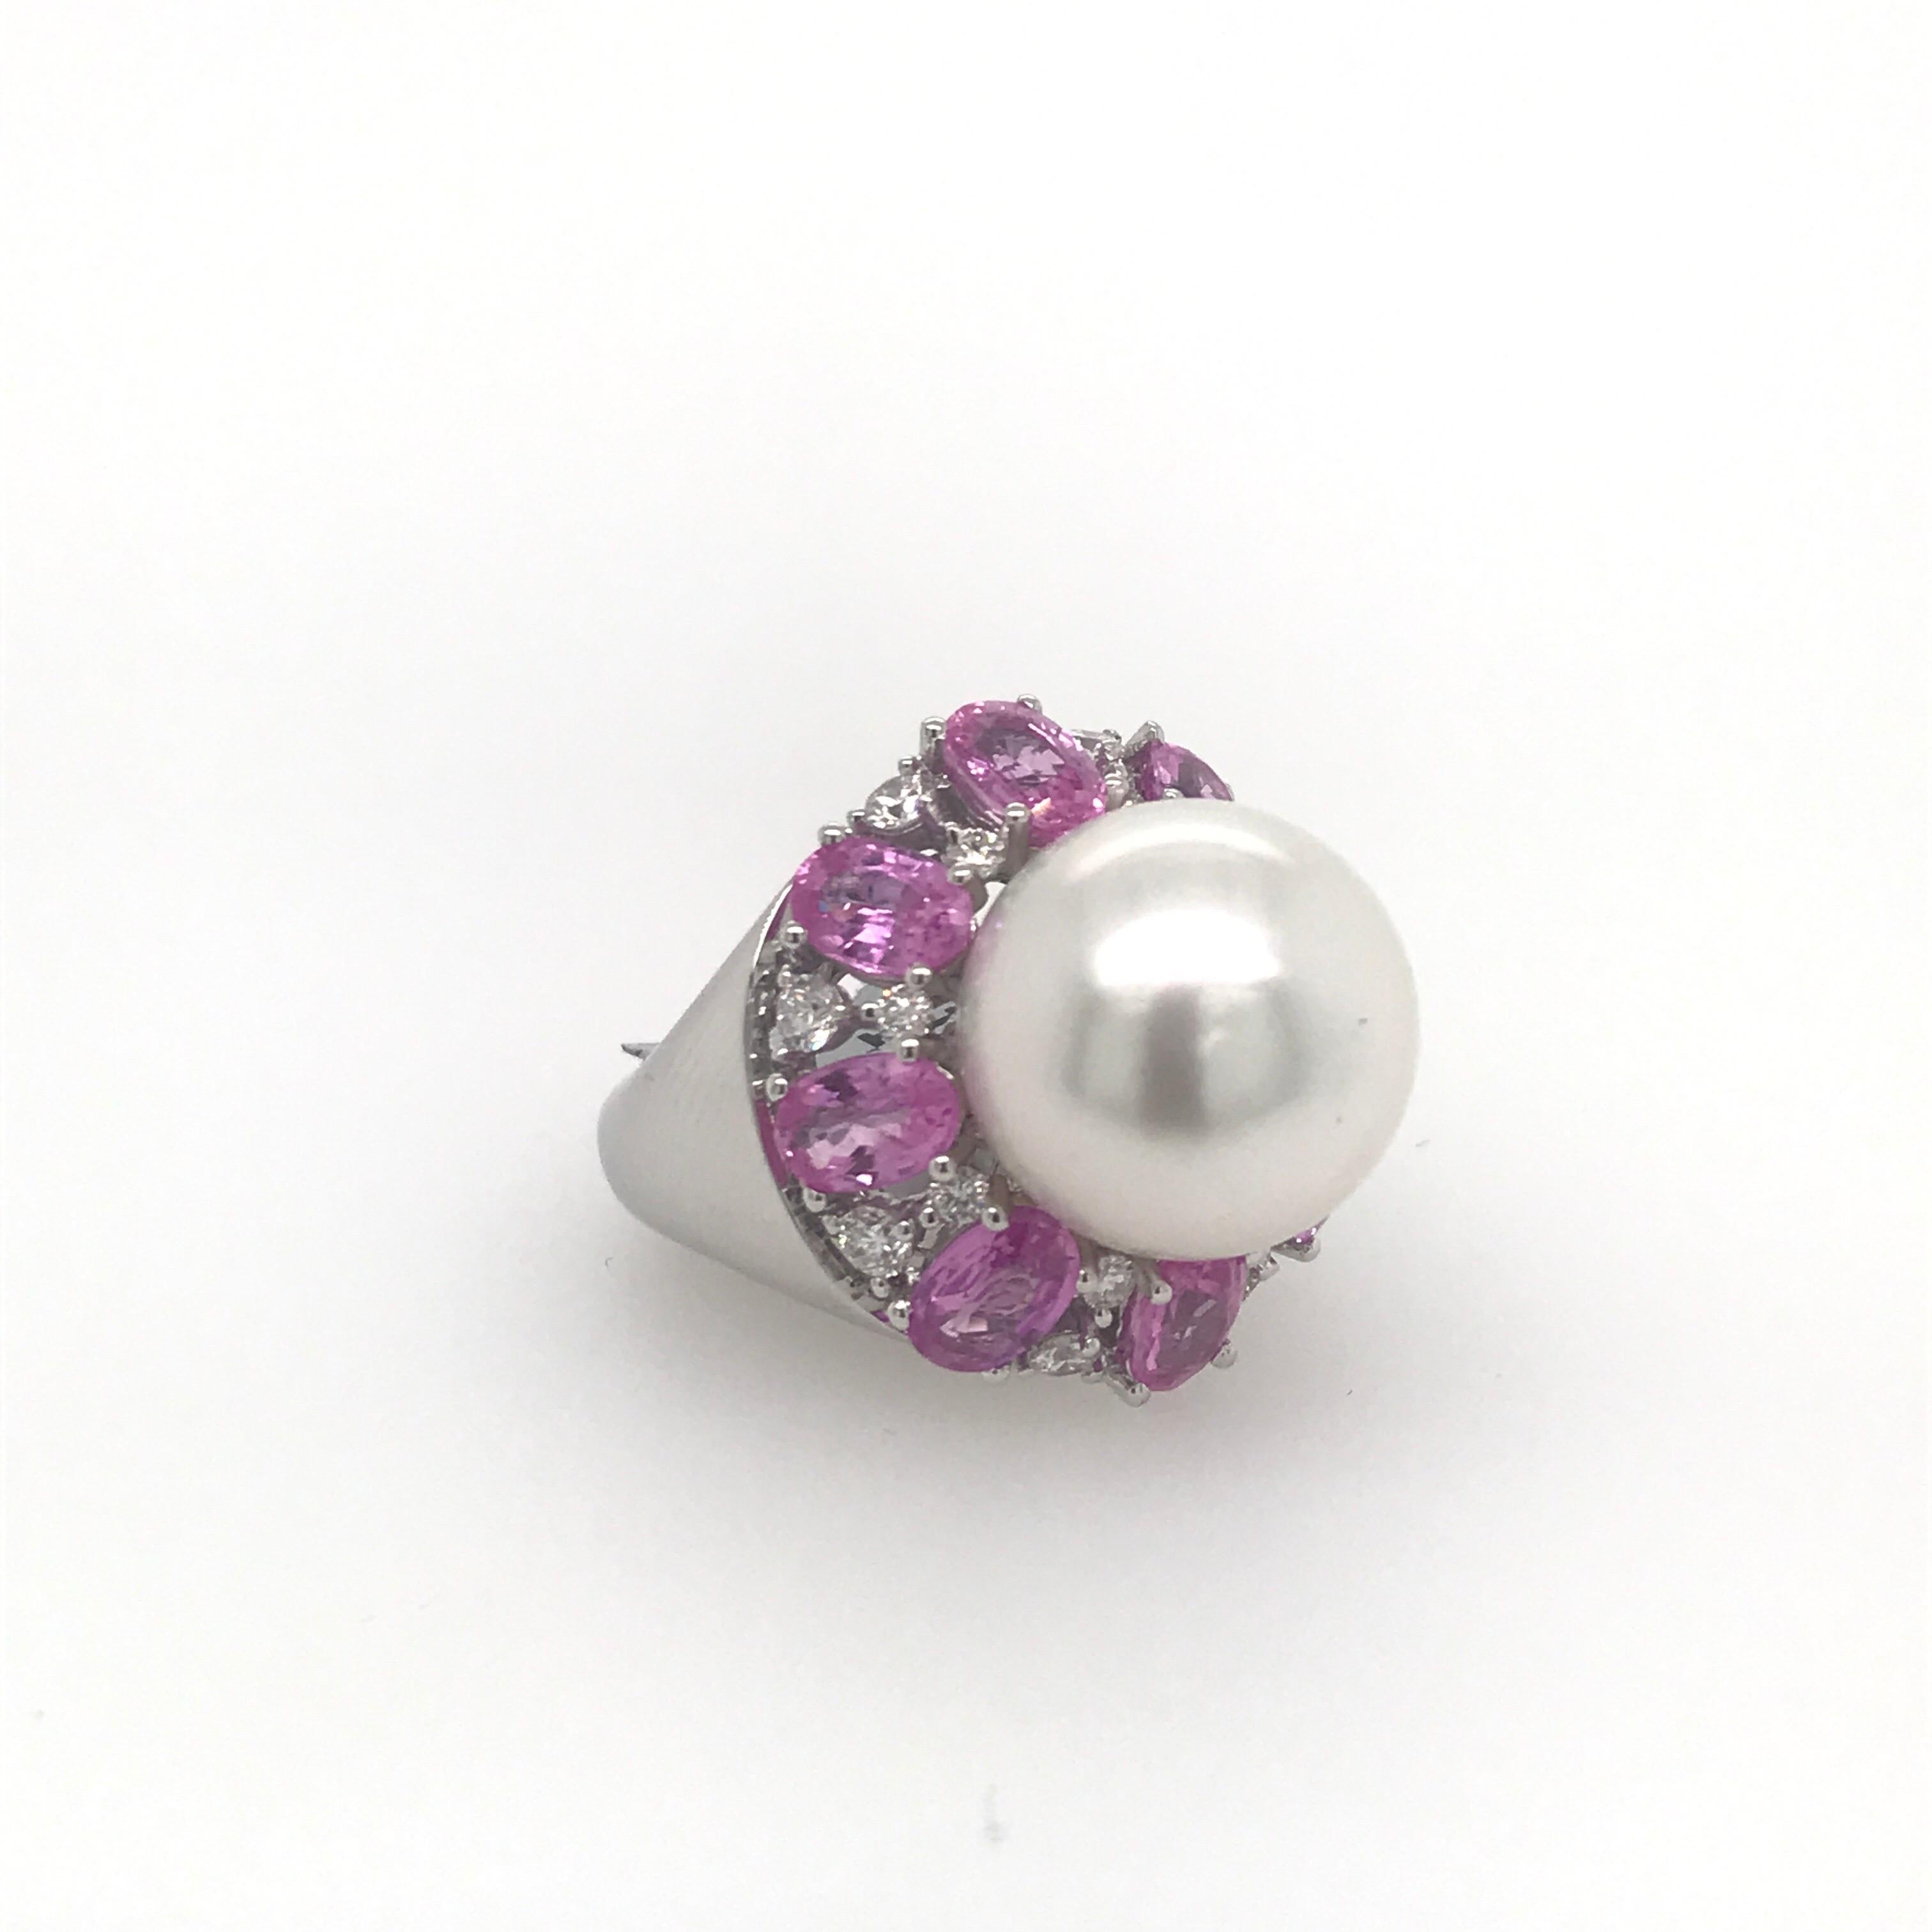 18K White Gold ring featuring one white South Sea pearl measuring 13-14 mm flanked with pink sapphires weighing 4.50 carats and diamonds. 